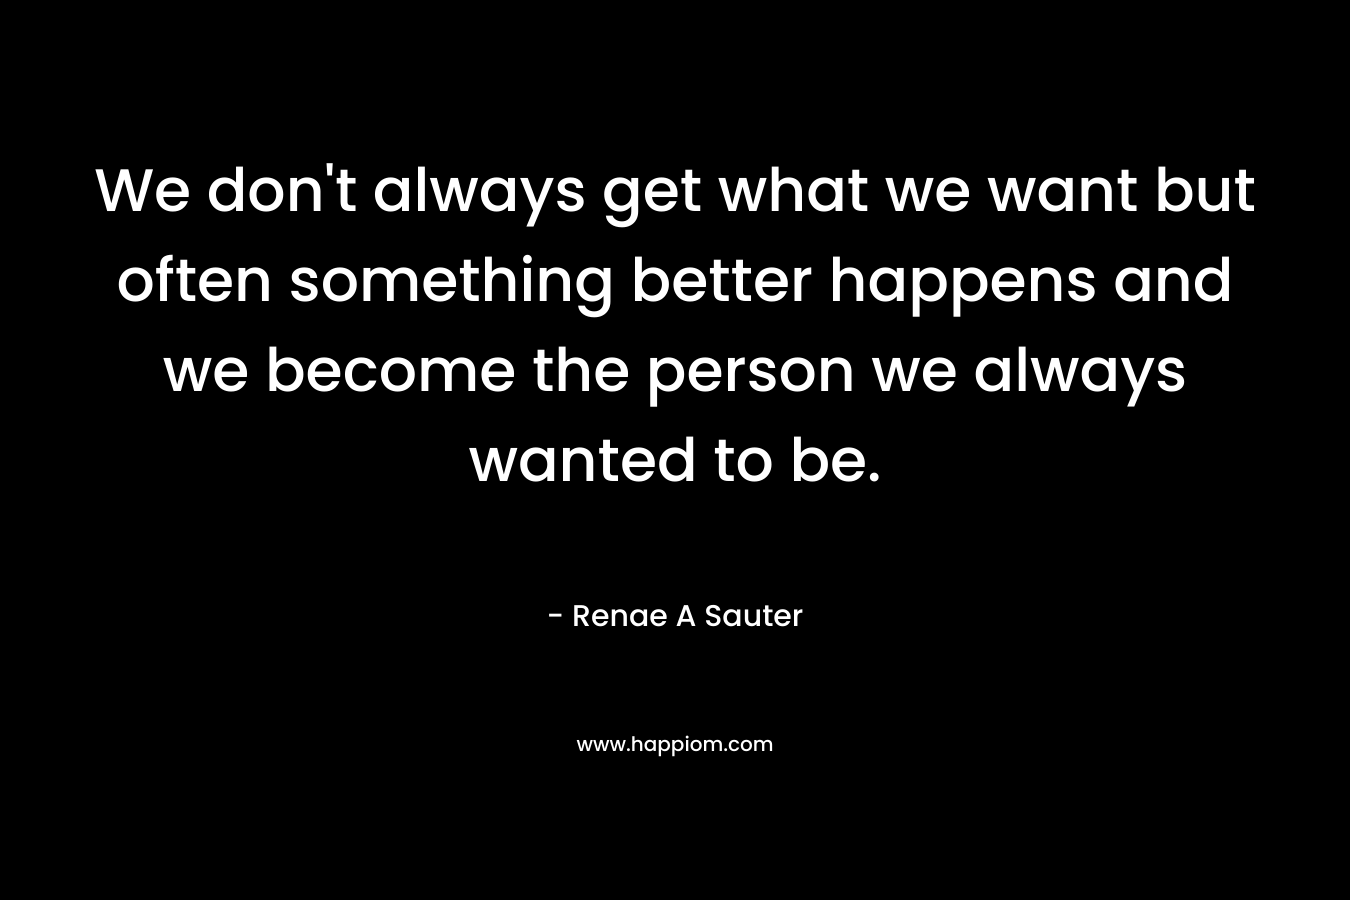 We don't always get what we want but often something better happens and we become the person we always wanted to be.